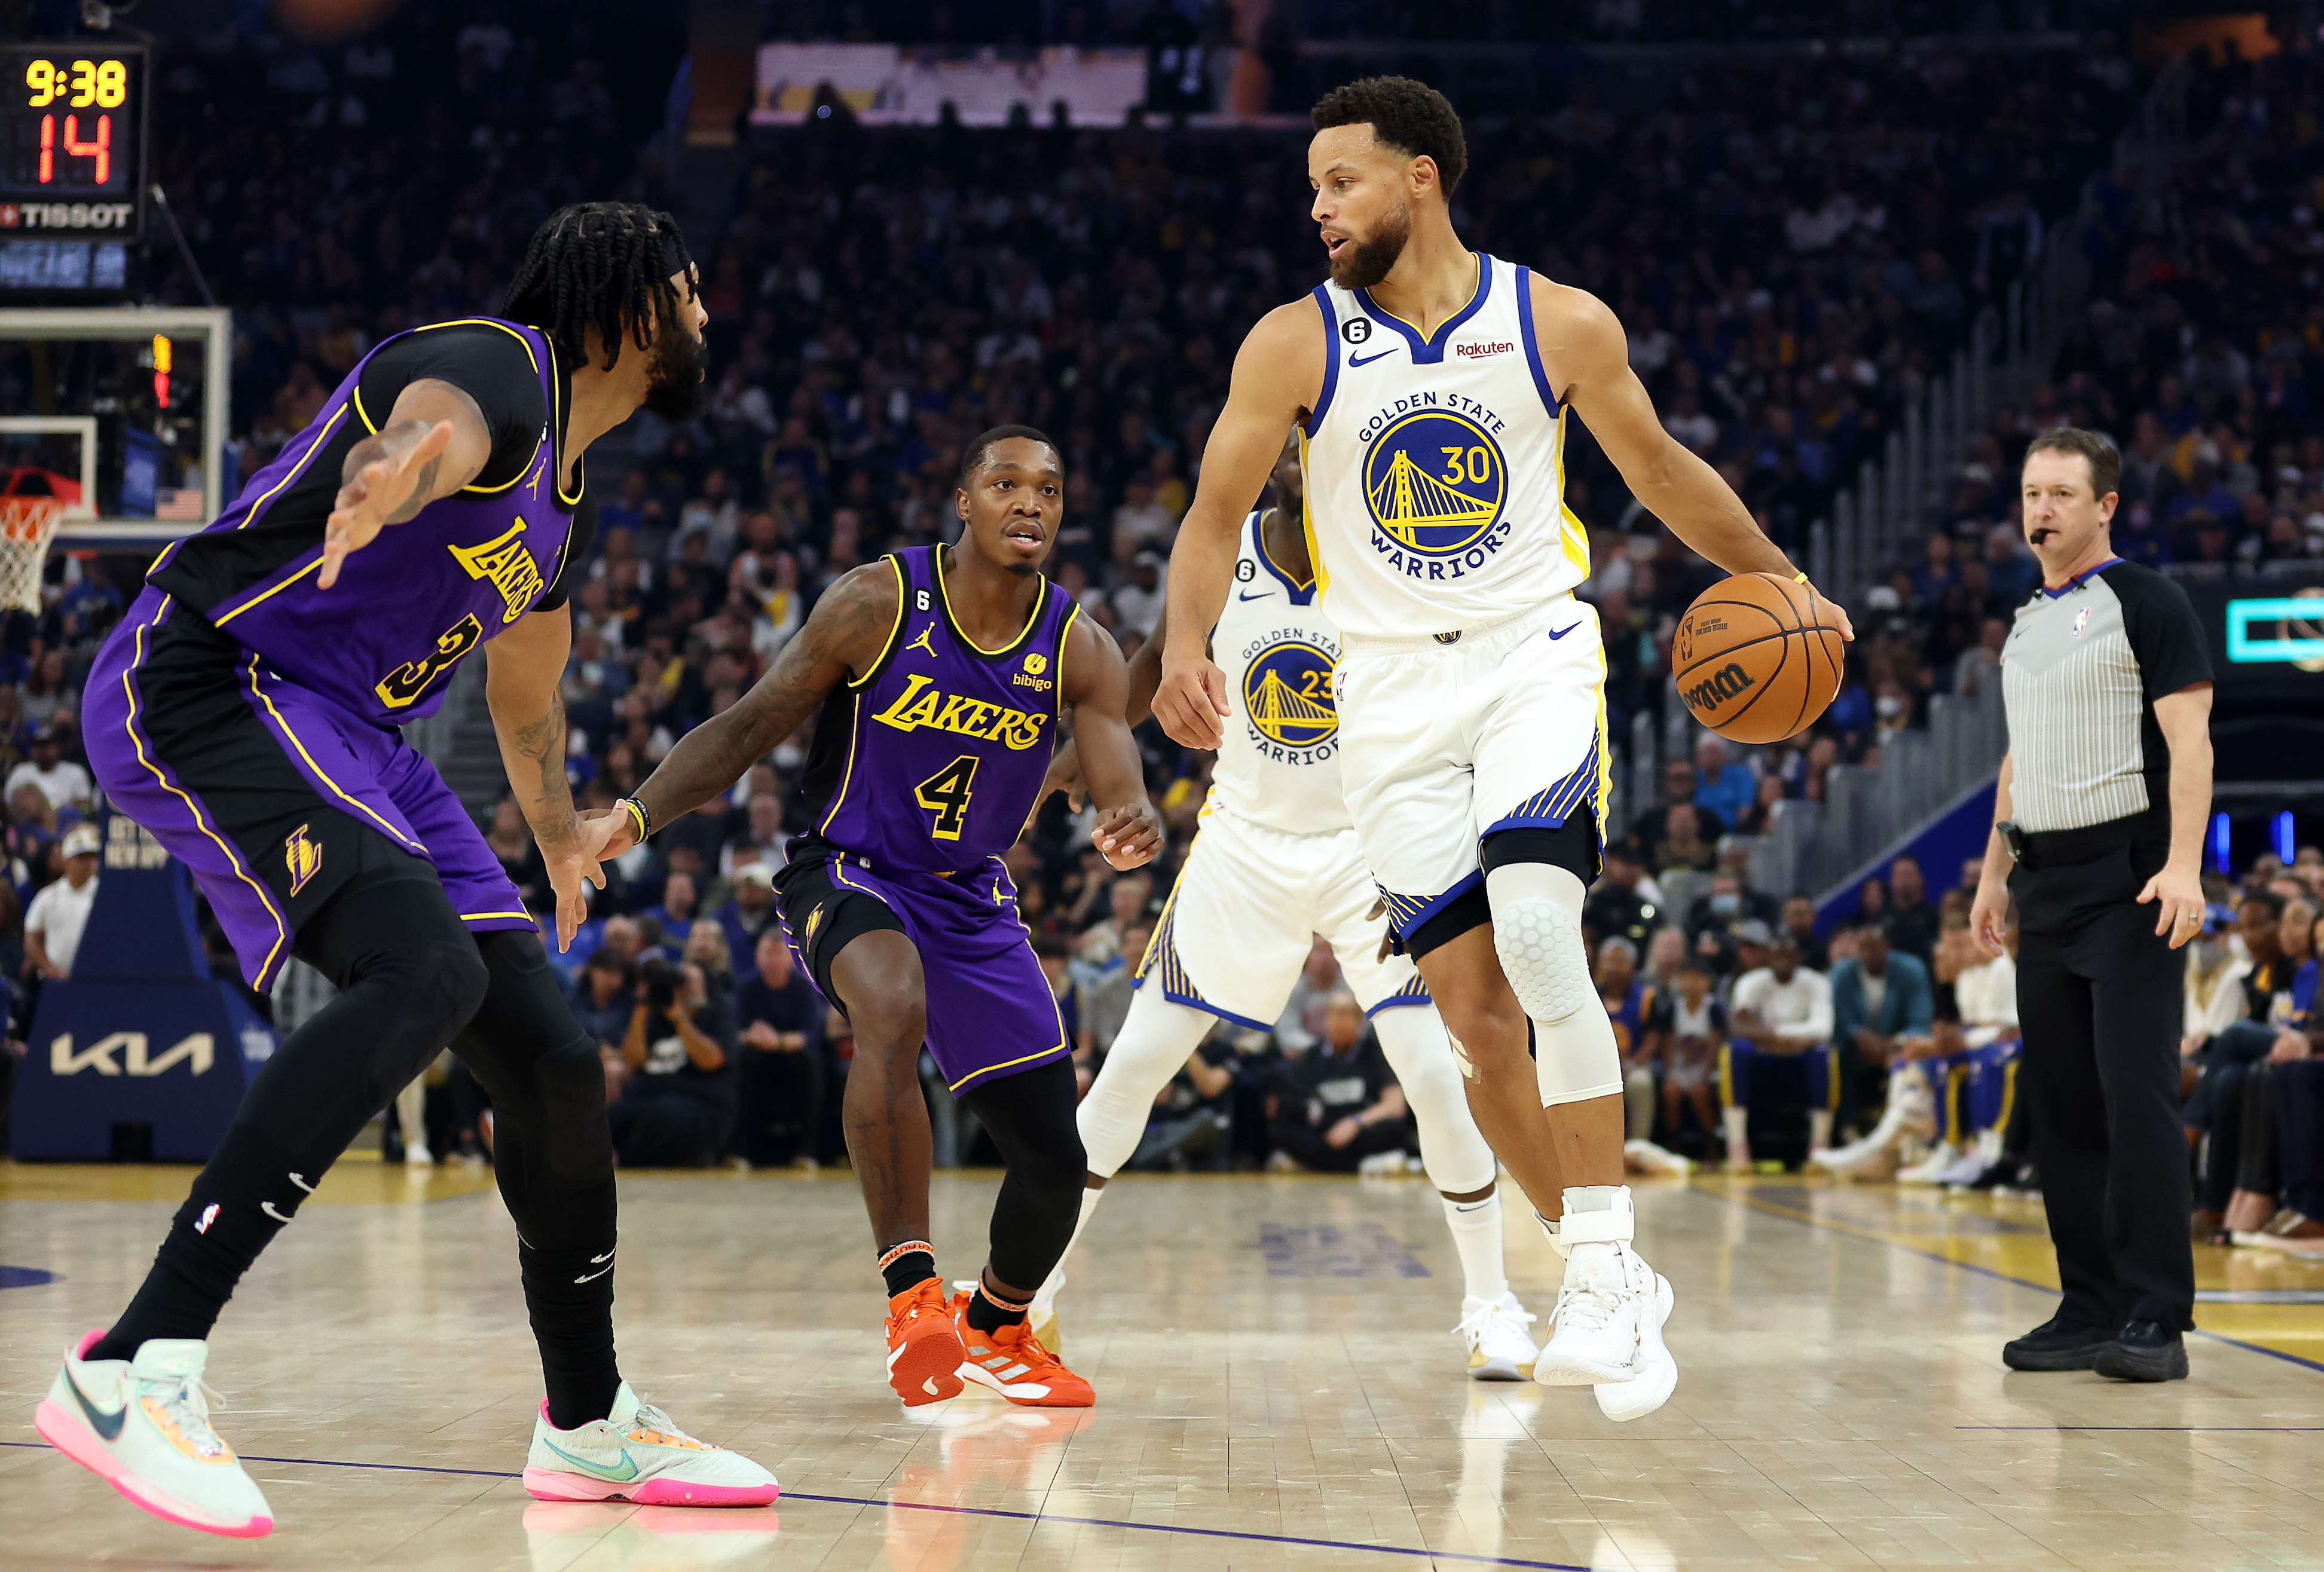 Stephen Curry, Warriors celebrate championship, beat Lakers